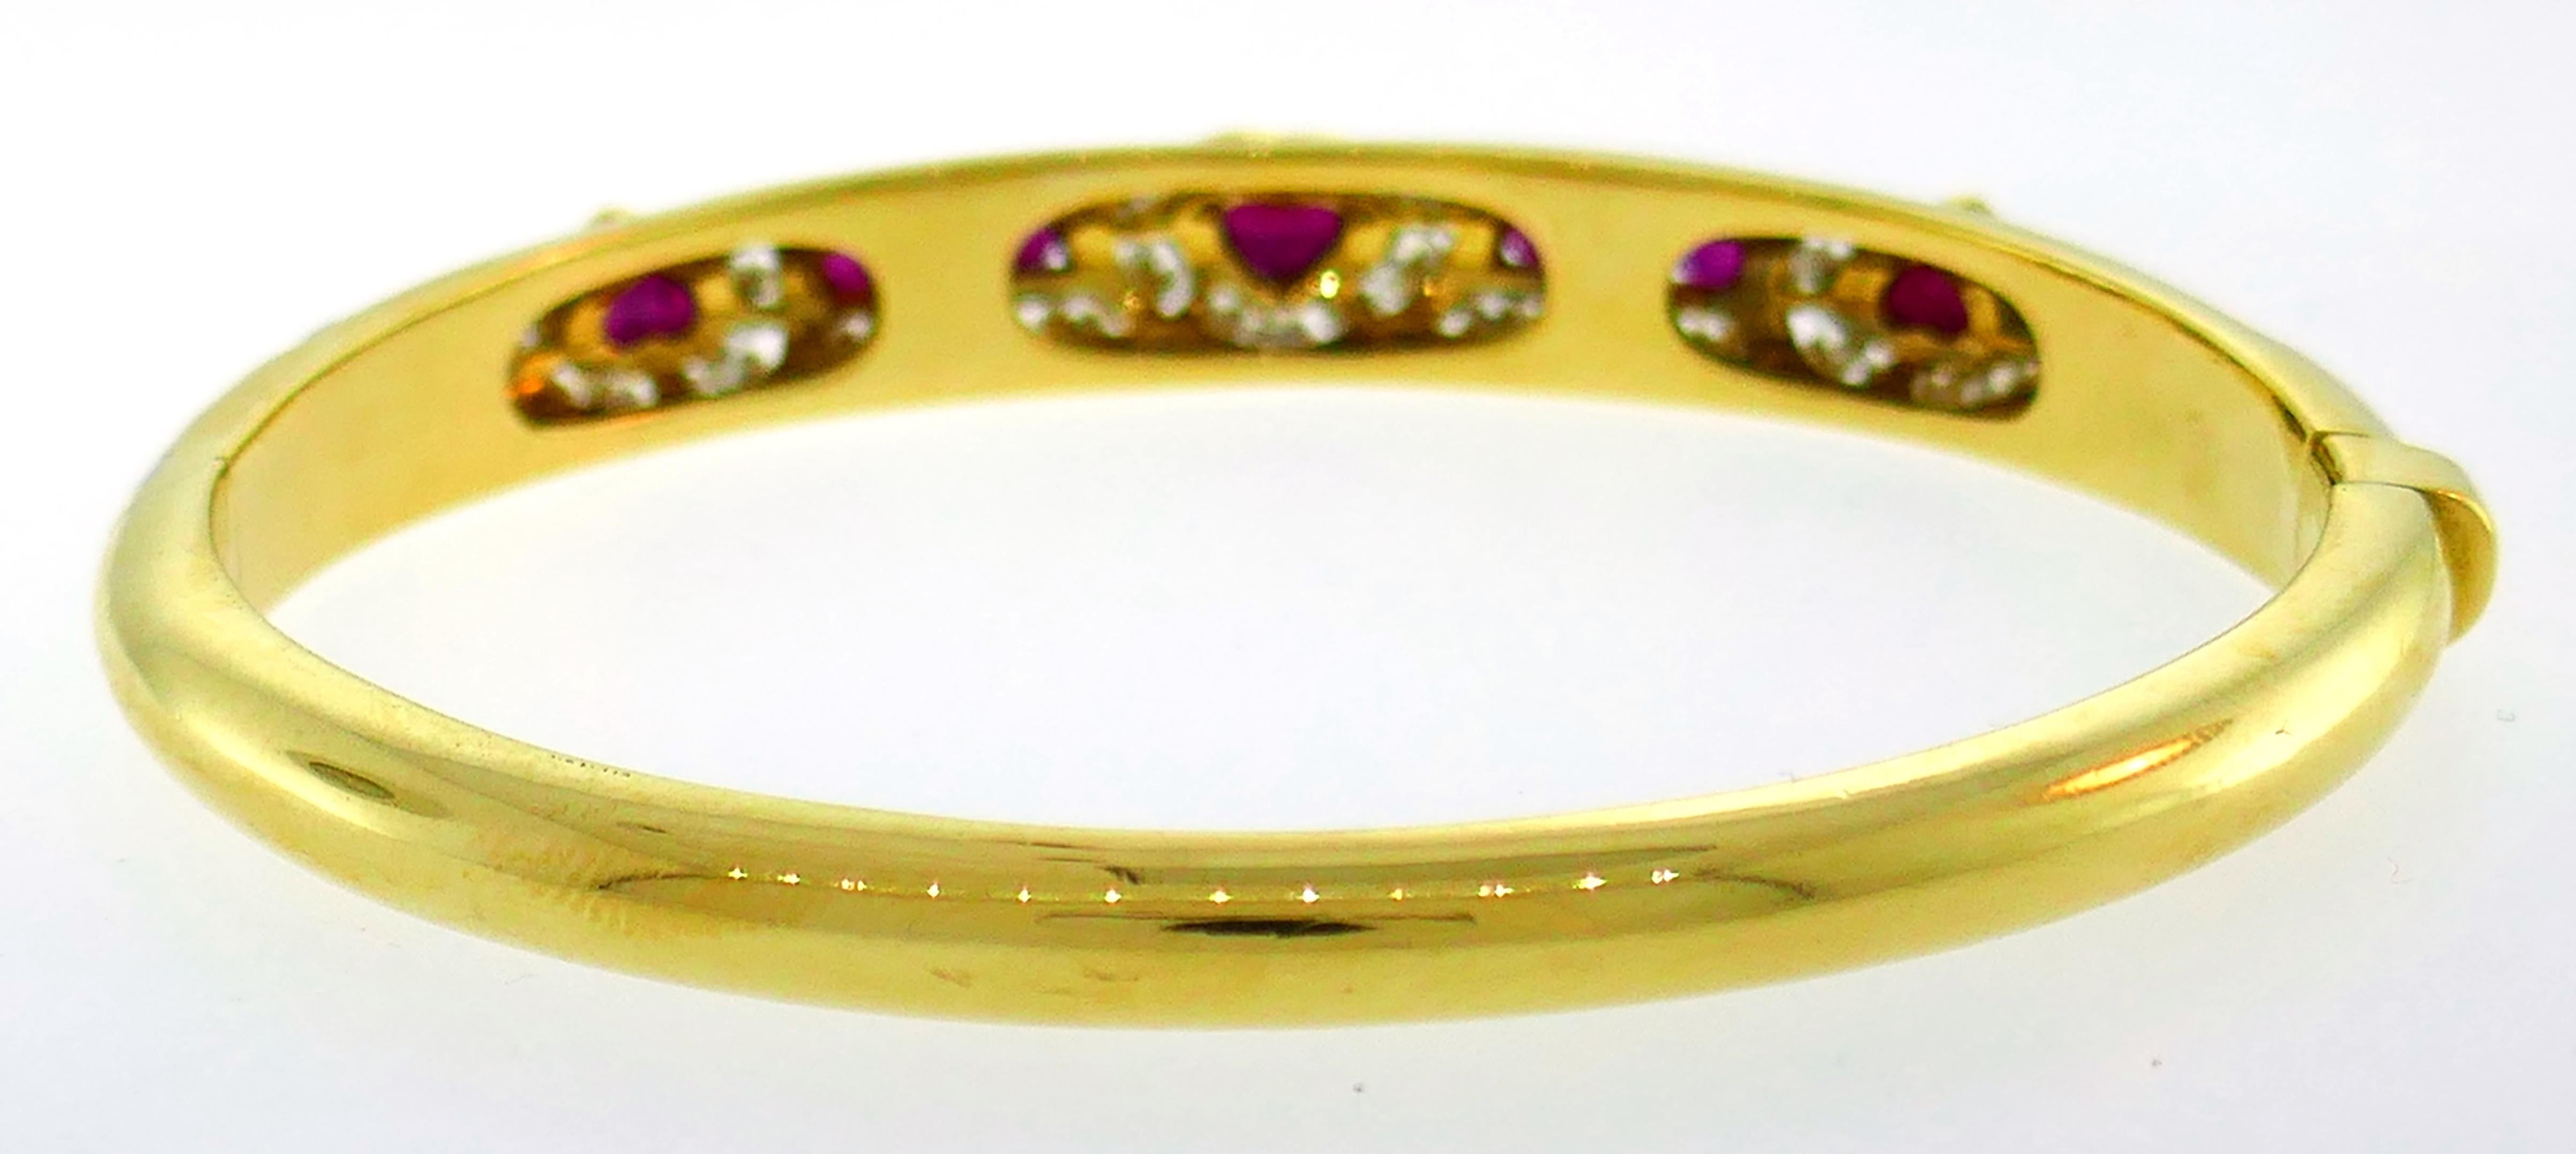 Fred Paris Heart Ruby Yellow Gold Bangle Bracelet with Diamond Accents, 1970s Damen